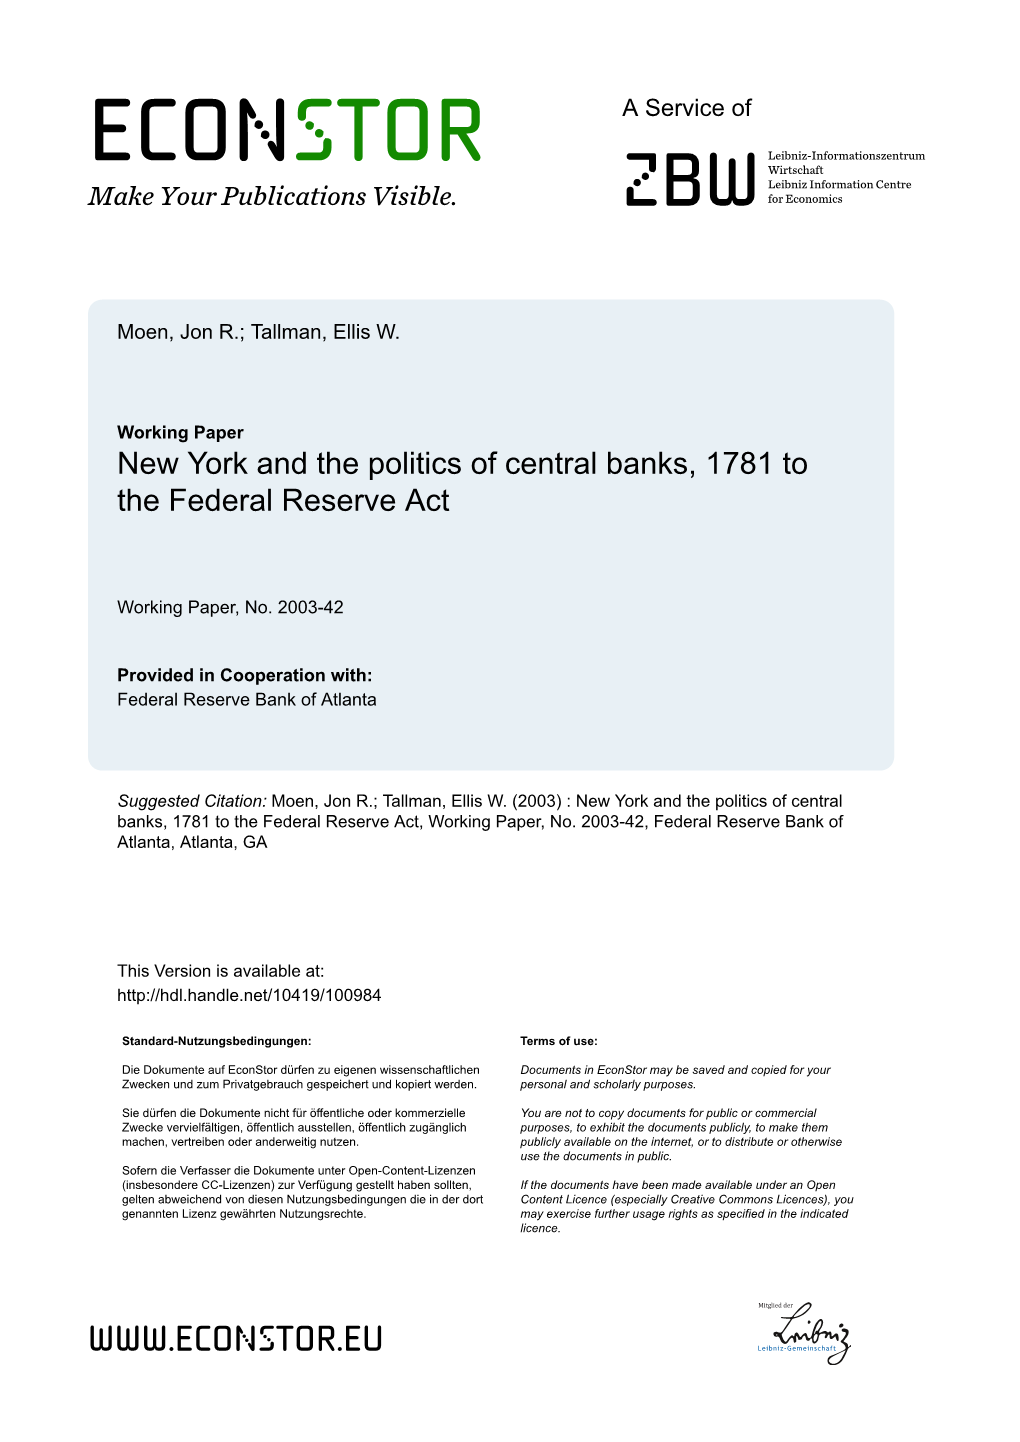 New York and the Politics of Central Banks, 1781 to the Federal Reserve Act